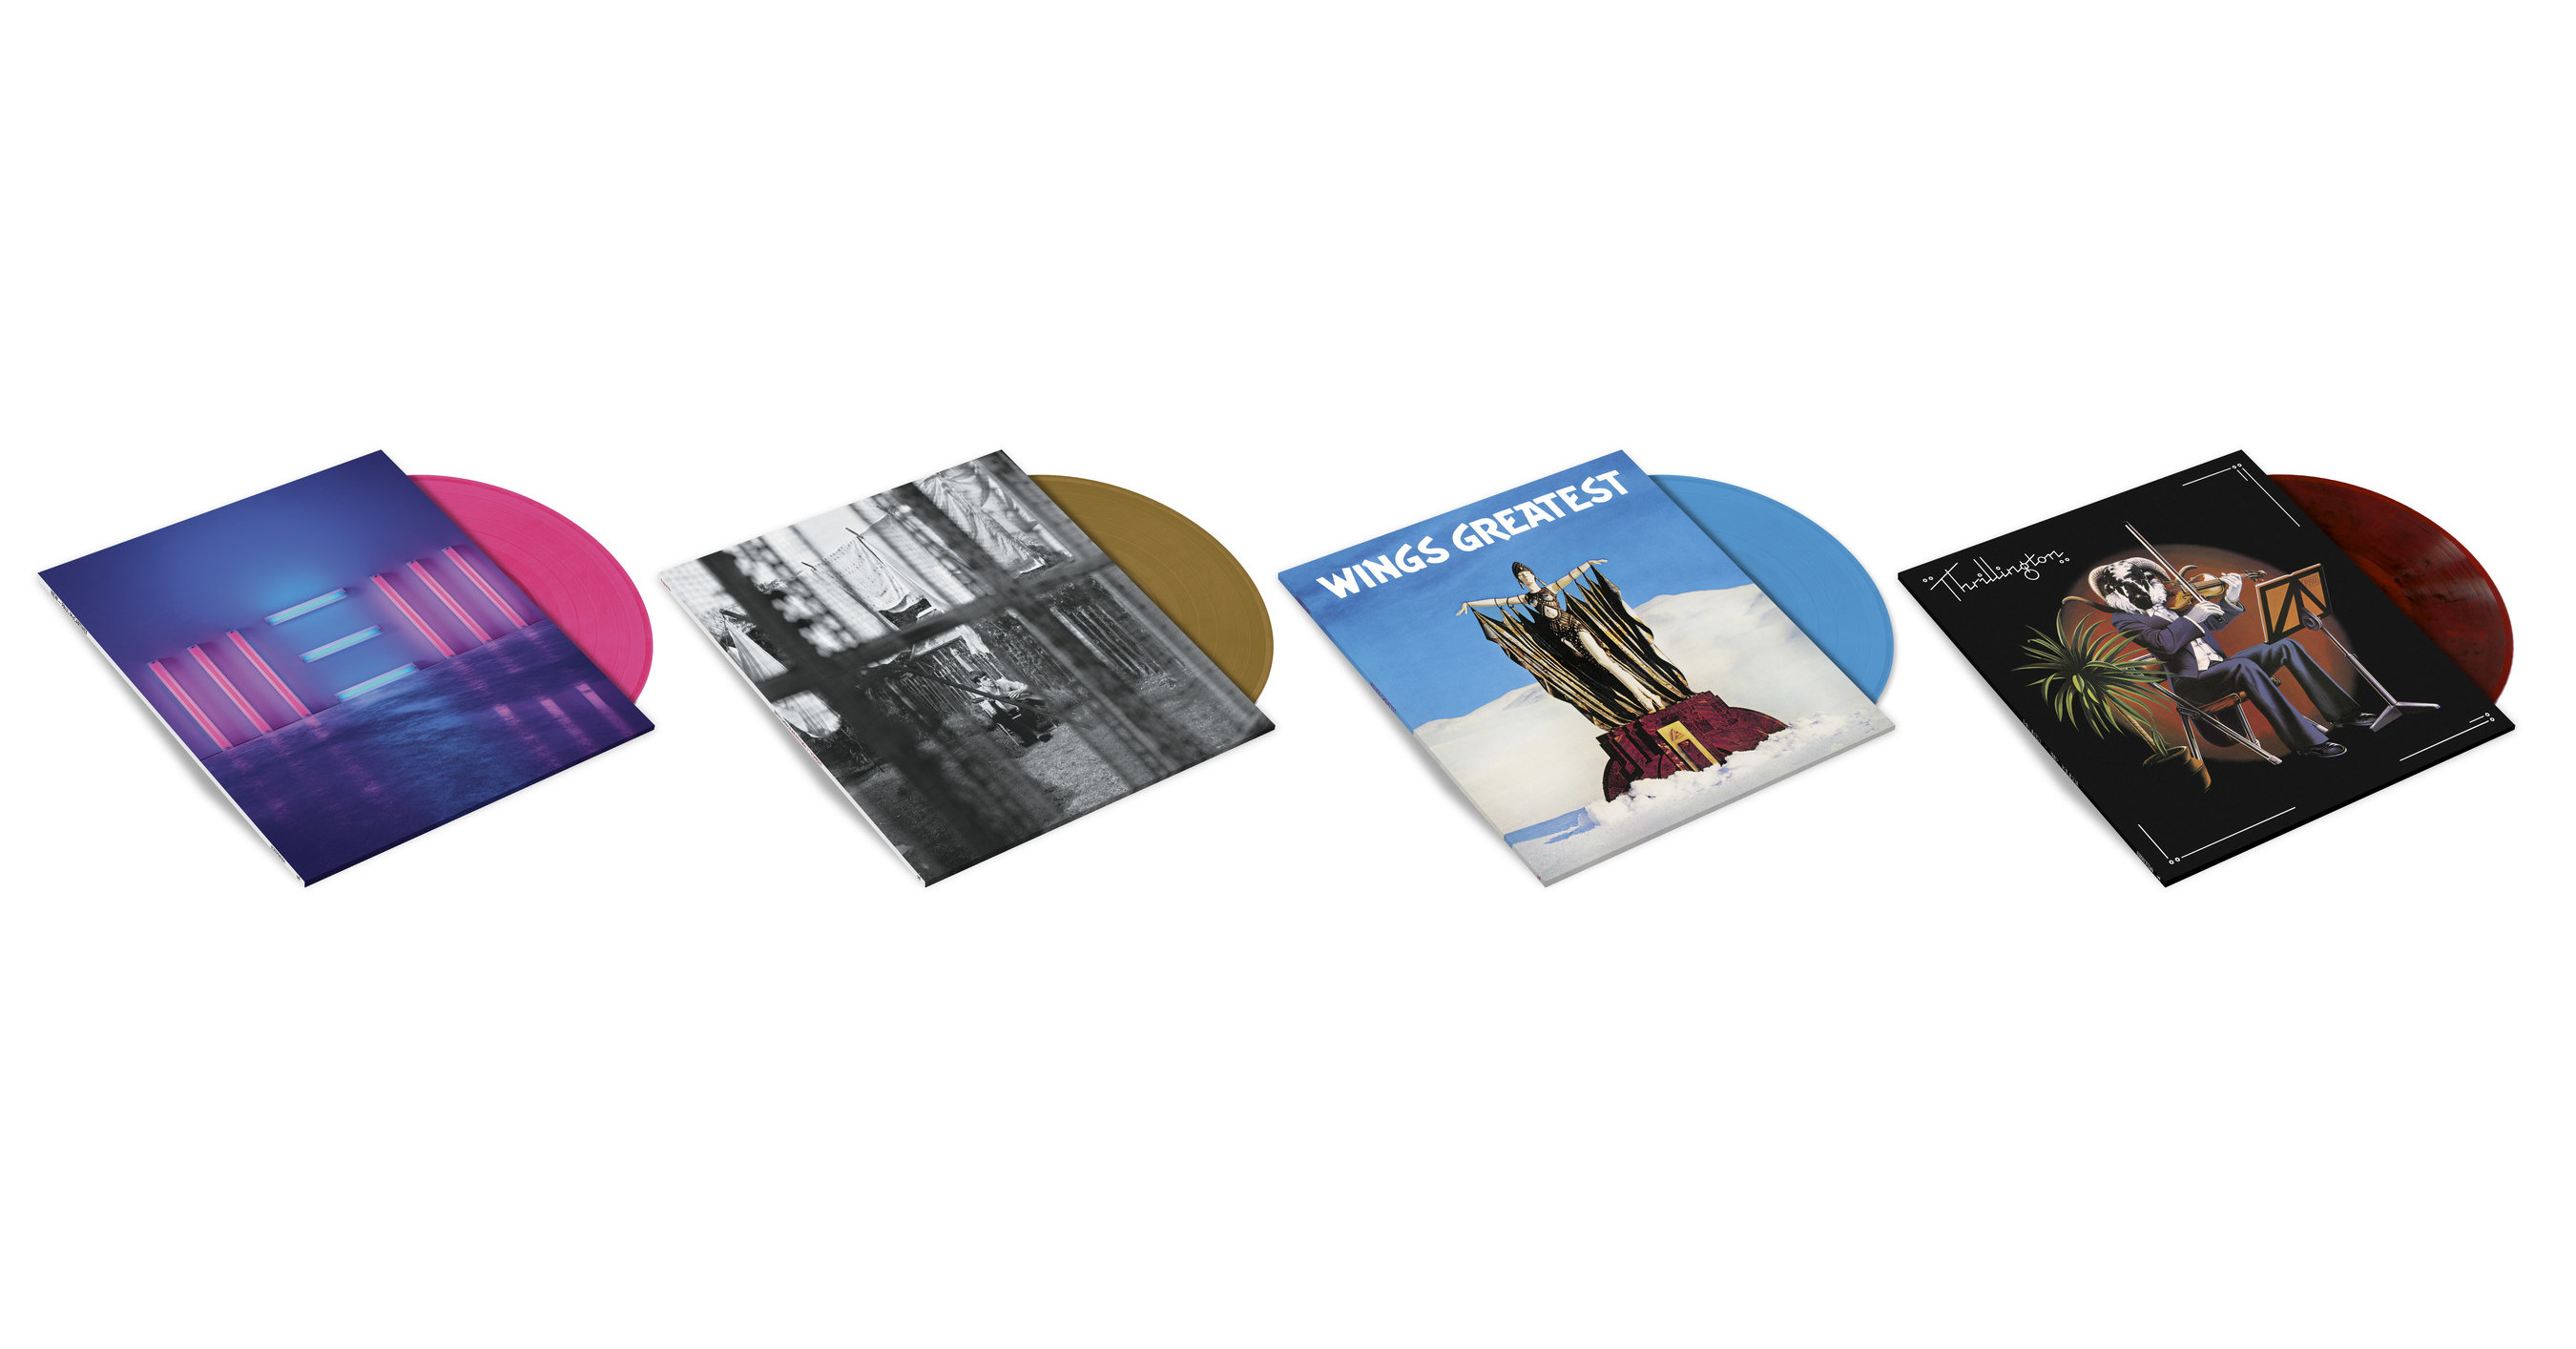 Paul Mccartney 2018 Catalogue Reissues Out May 18 Via Mpl Capitol New Chaos And Creation In The Backyard Wings Greatest And Thrillington